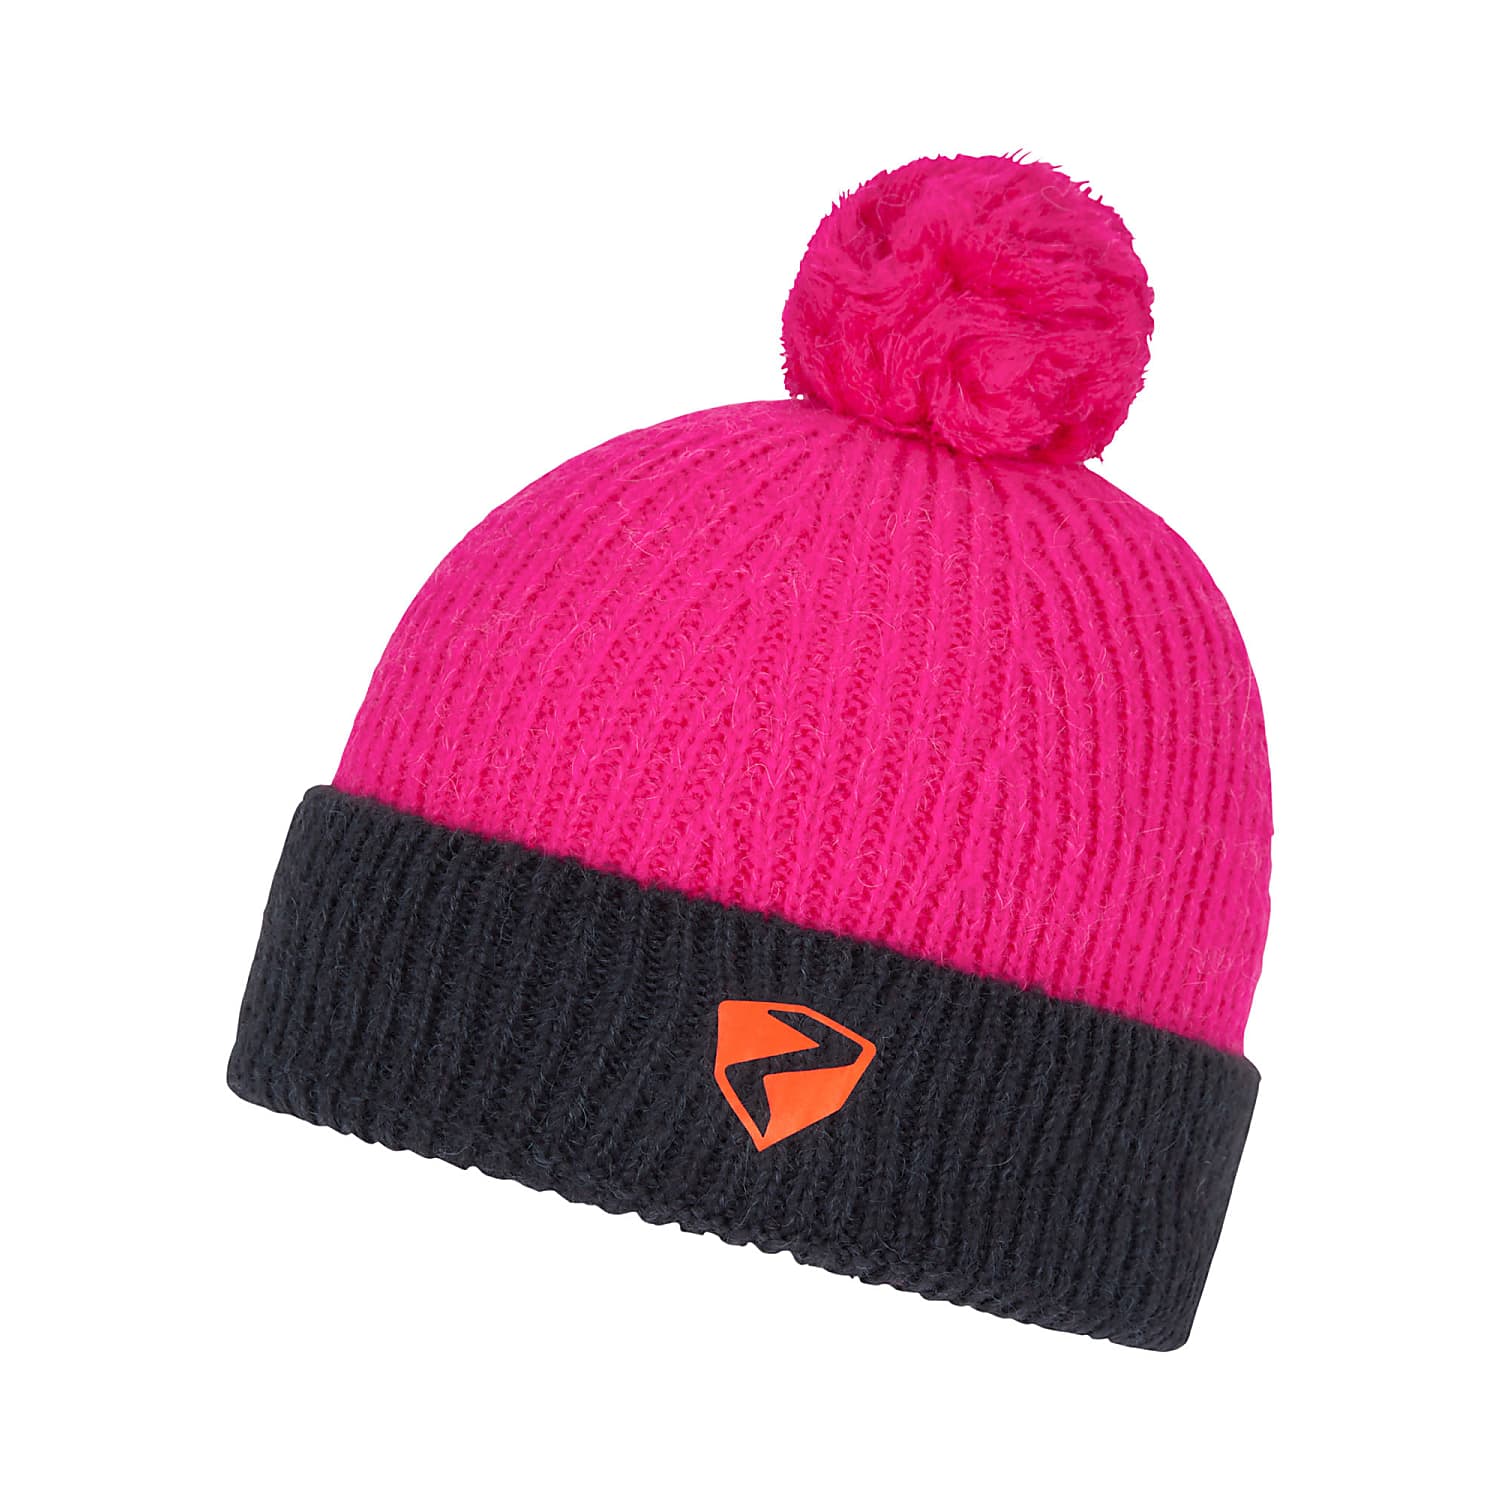 Ziener shipping Pink Bright - Fast MODEL), and JUNIOR cheap IKEN HAT (PREVIOUS